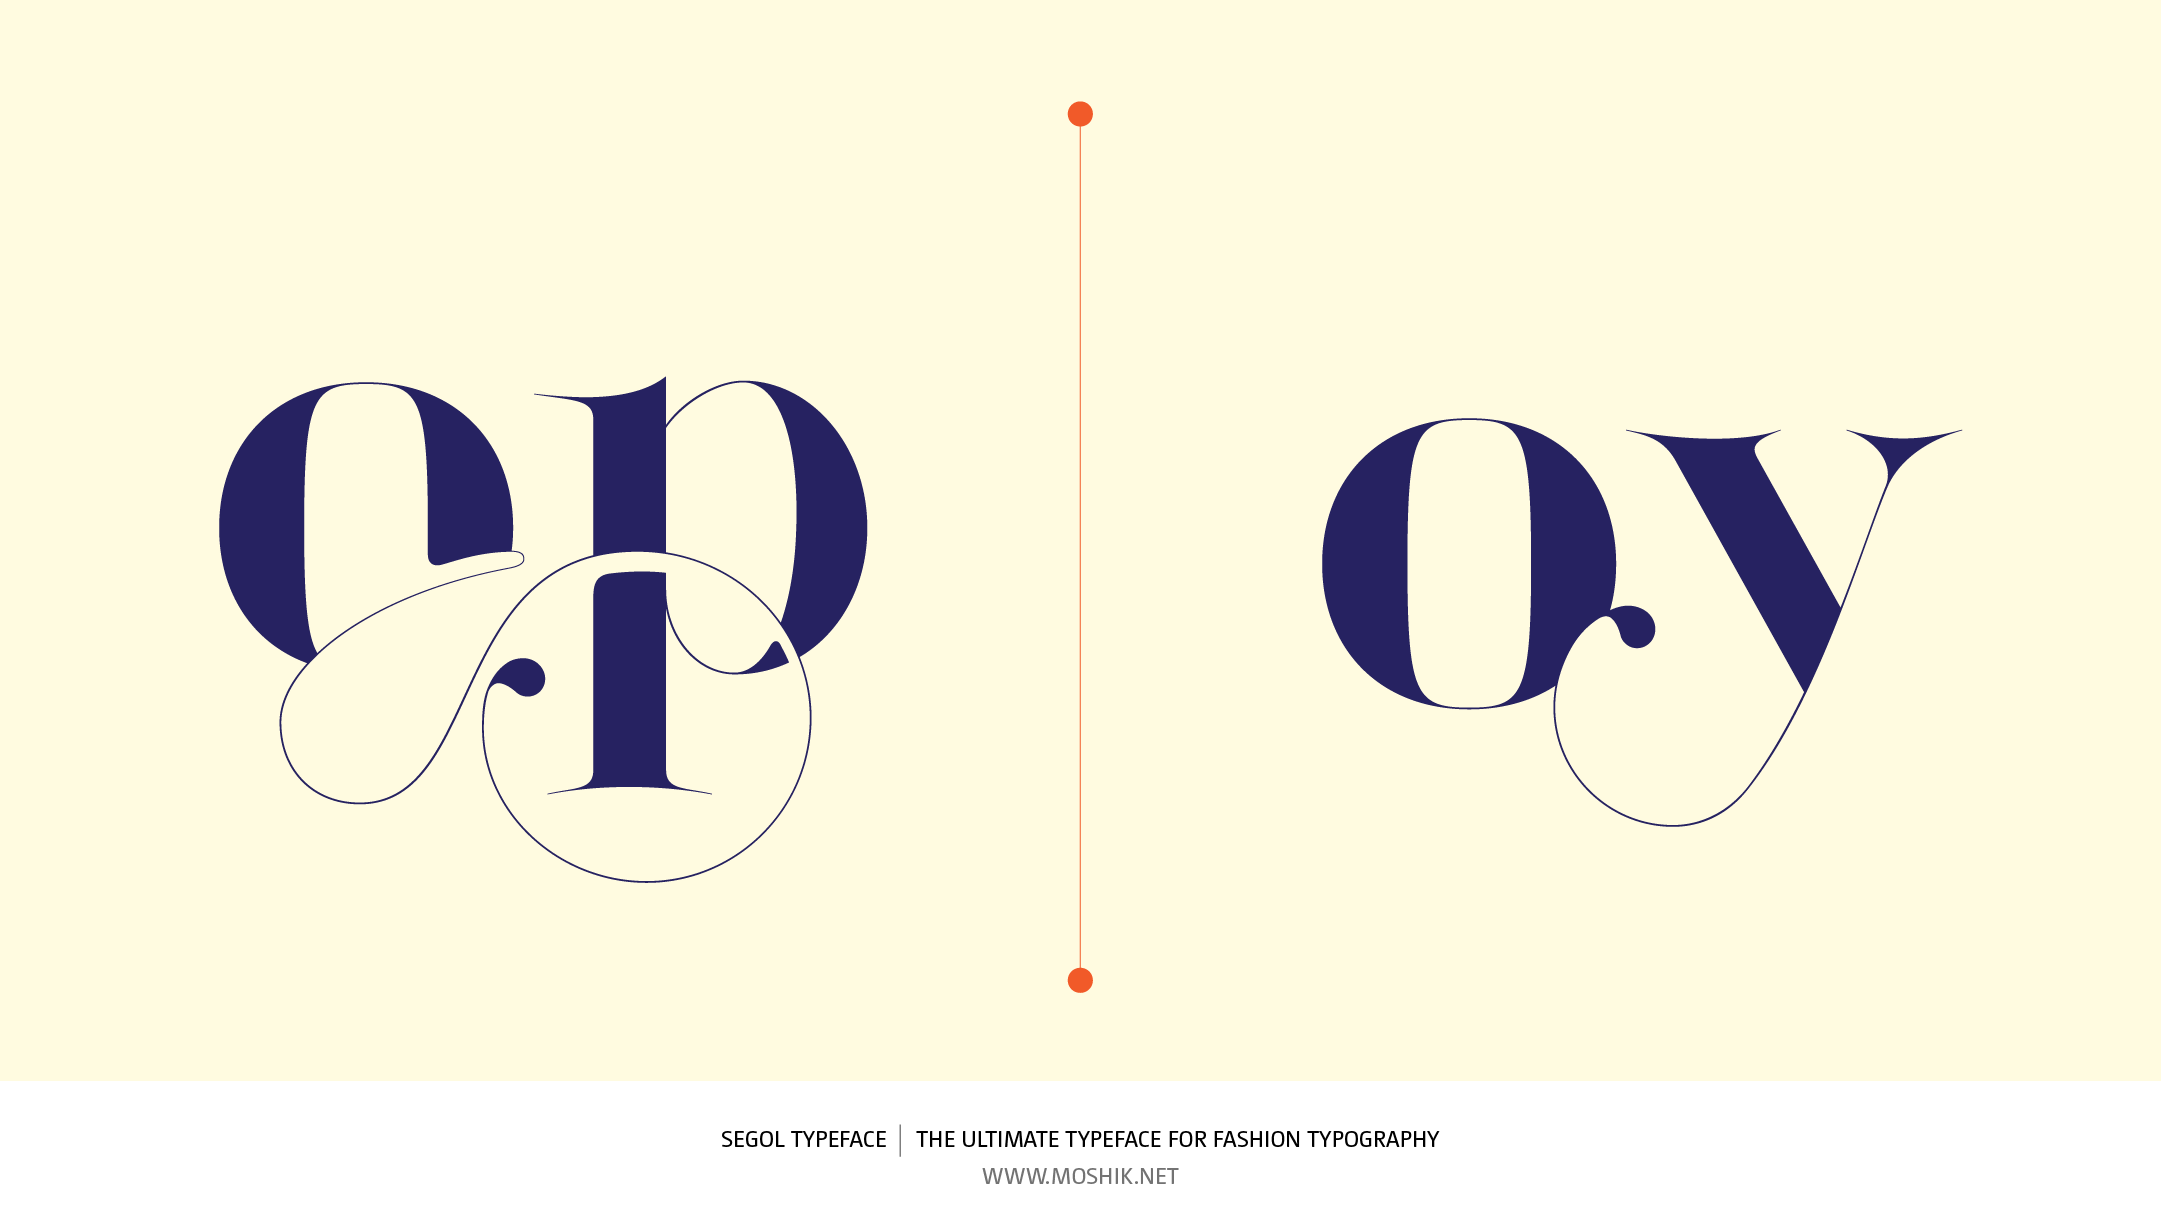 op, oy, Segol Typeface, New, ligature, Vogue, elle, Esquire, logos, custom, fashion typography, sexy logos, must have fonts 2021, best fonts 2021, best logos 2021, Moshik Nadav, Fashion magazine Typography, Fashion logos, Fashion fonts, Luxury logos designer, luxury fonts, luxury packaging design, makeup fonts, cosmetics branding